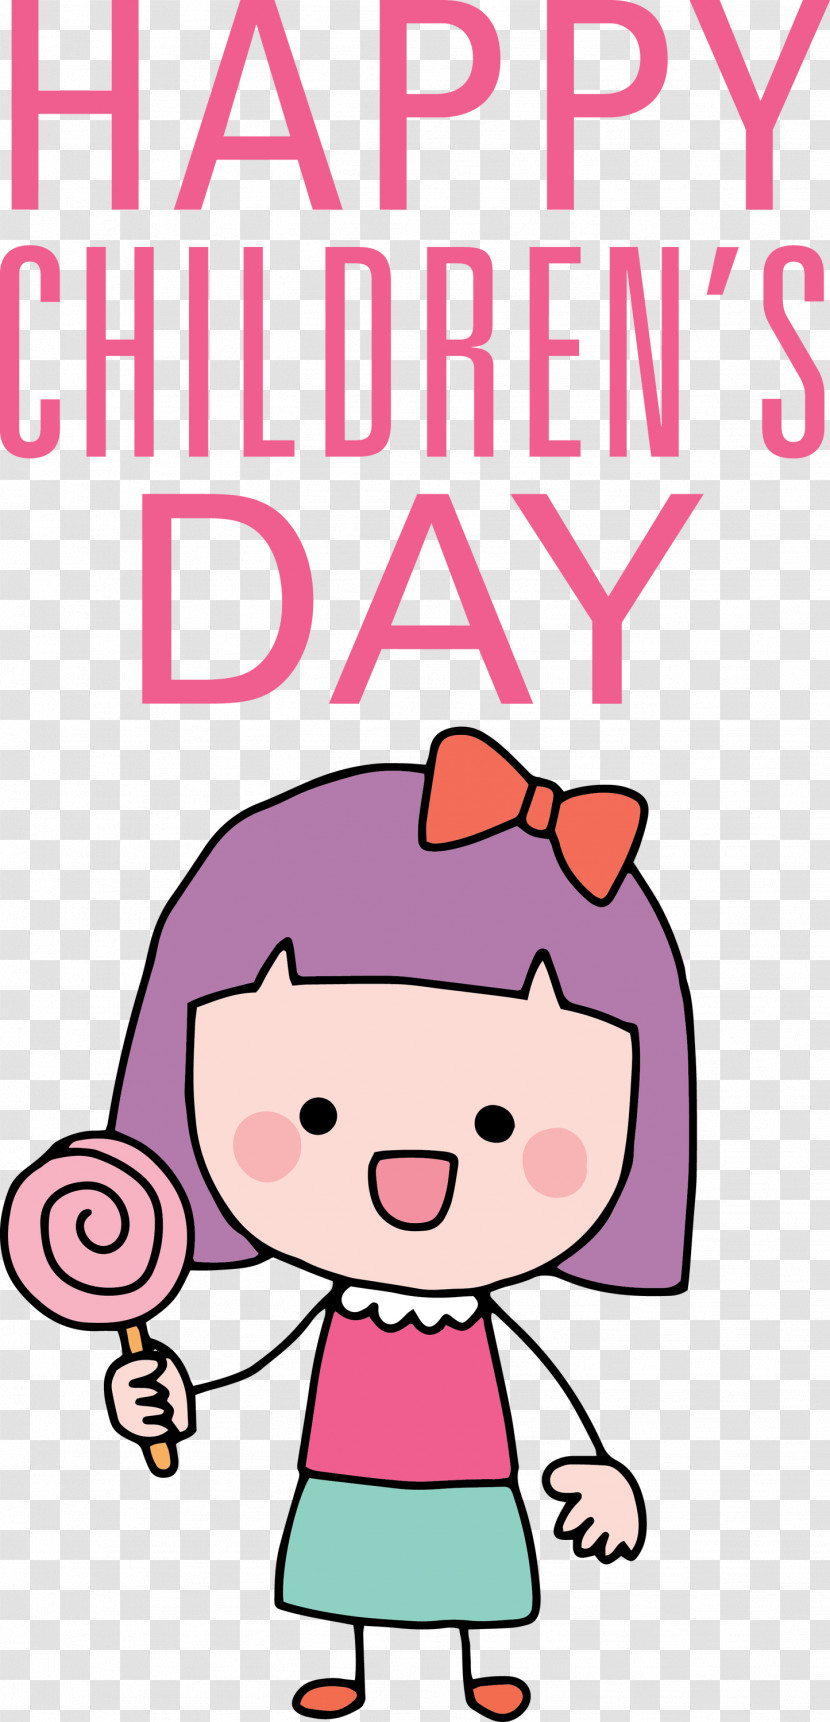 Cute Childrens Day Banner Transparent PNG